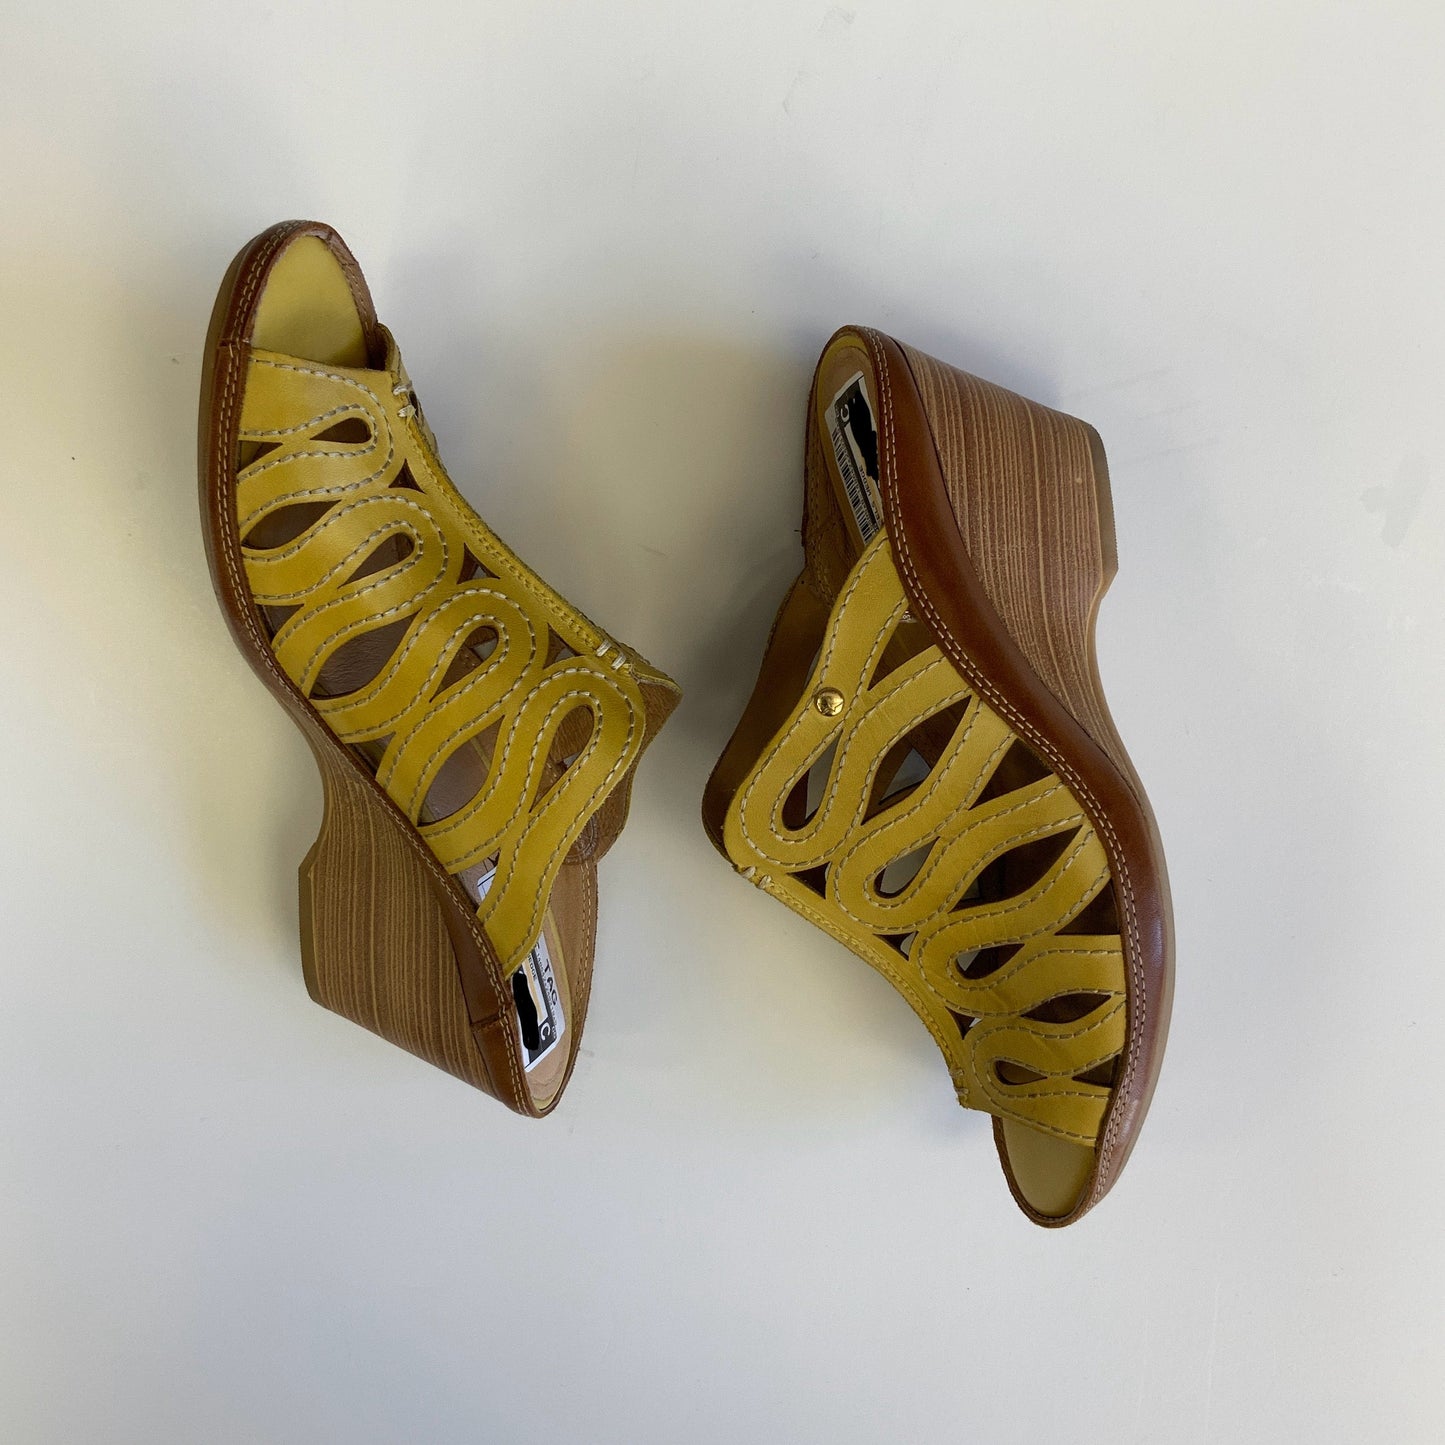 Sandals Heels Wedge By Pikolinos  Size: 8.5